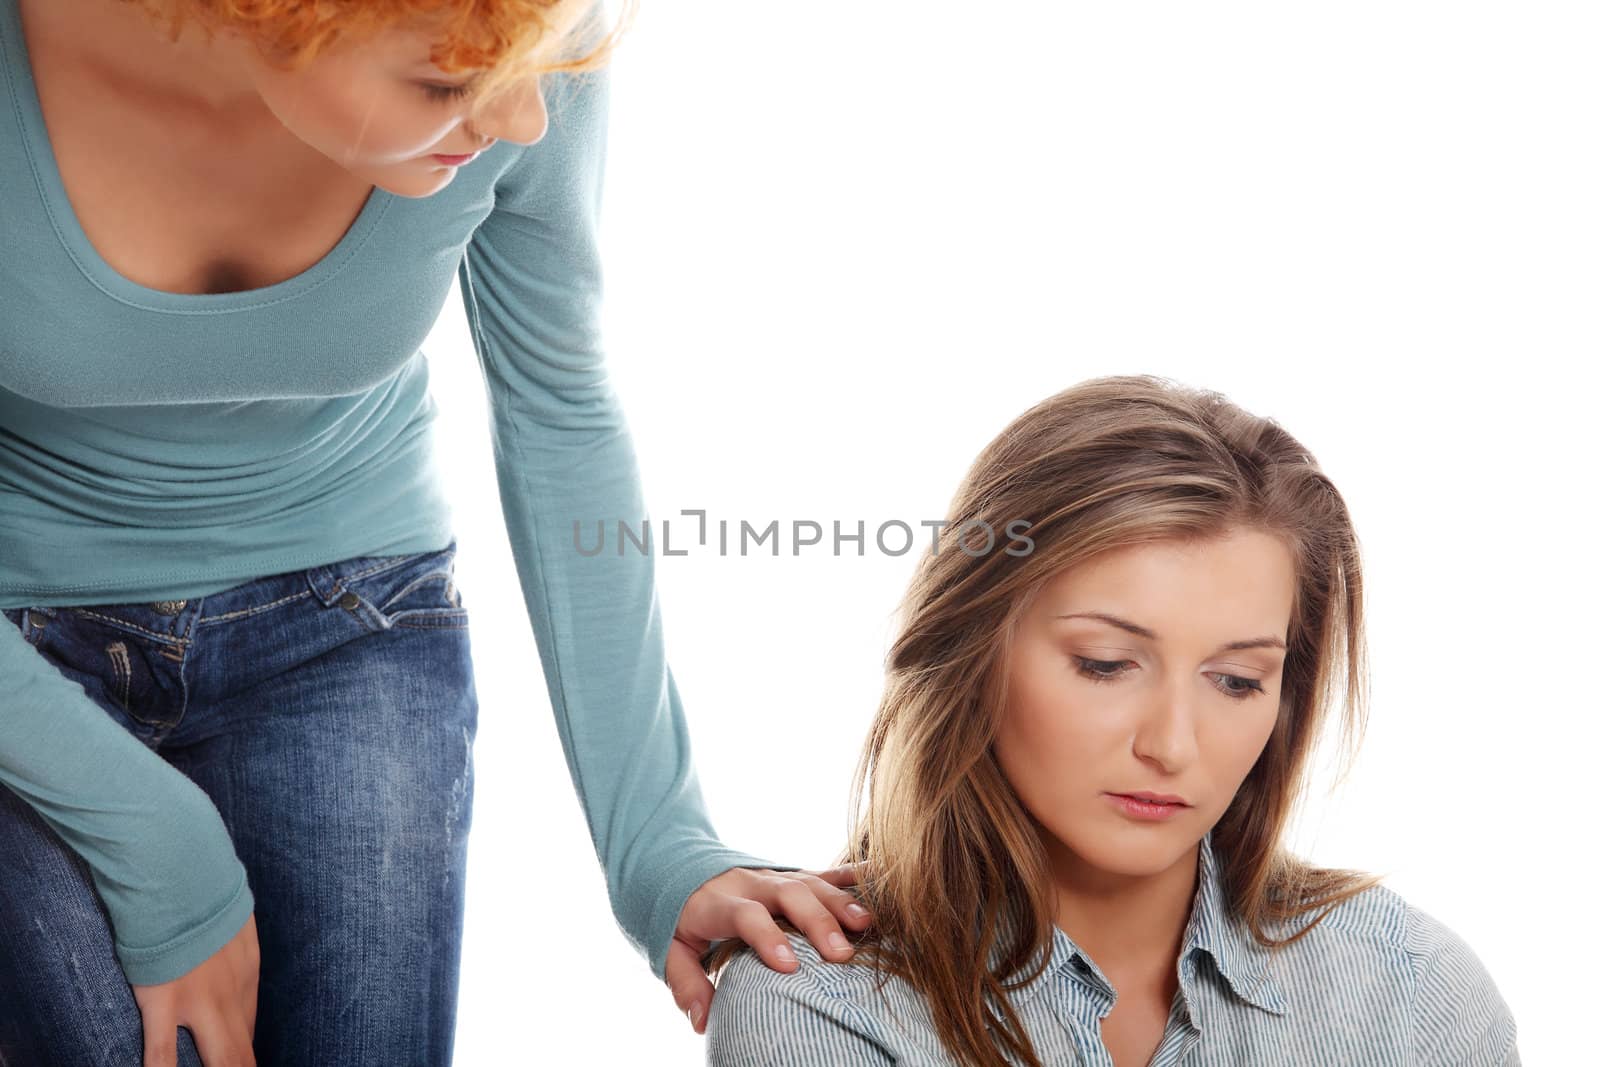 Troubled young girl comforted by her friend. Isolated on white background